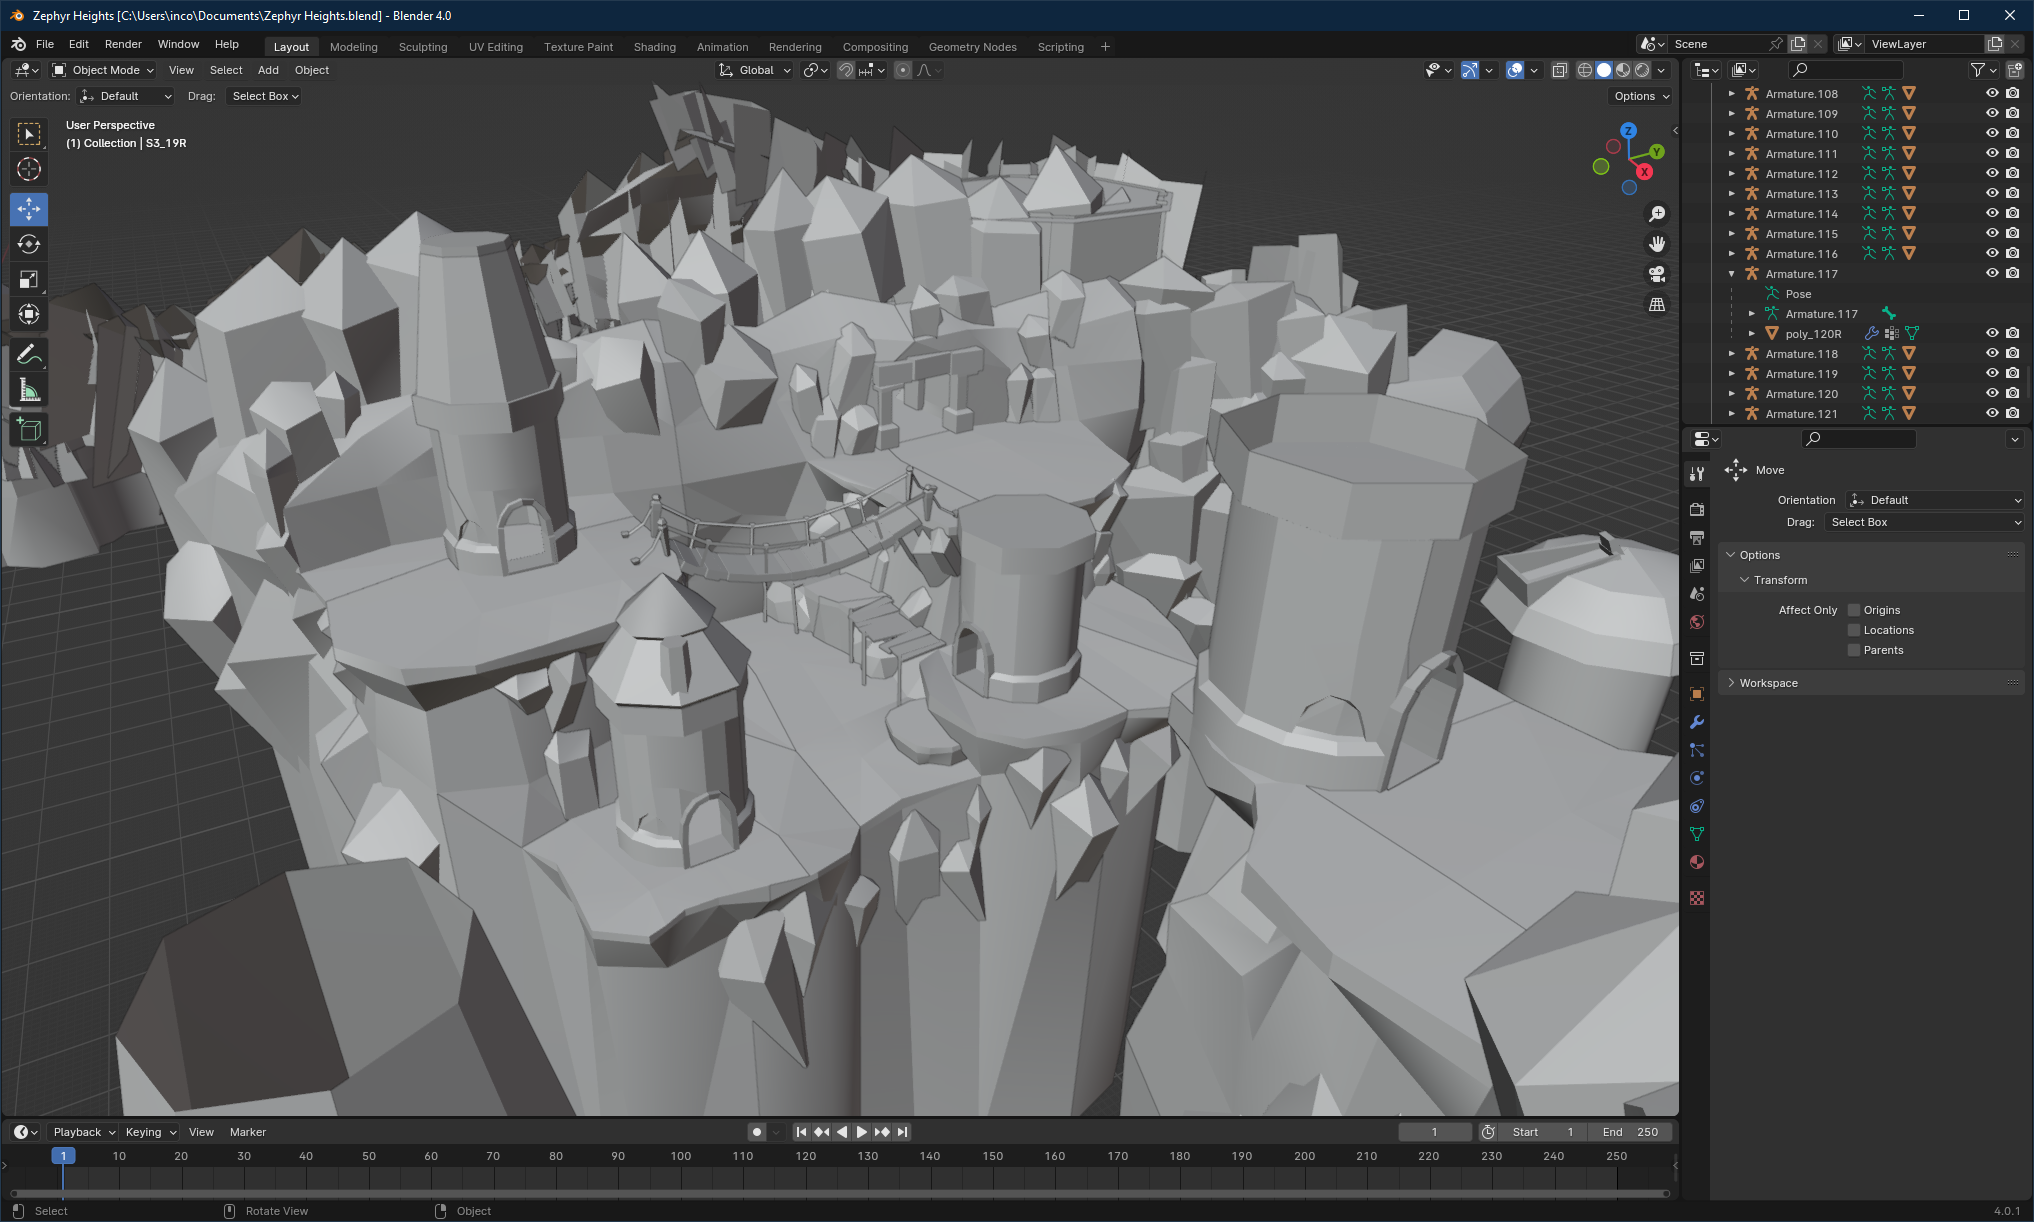 A screenshot of Blender, with models from Zephyr Heights loaded.